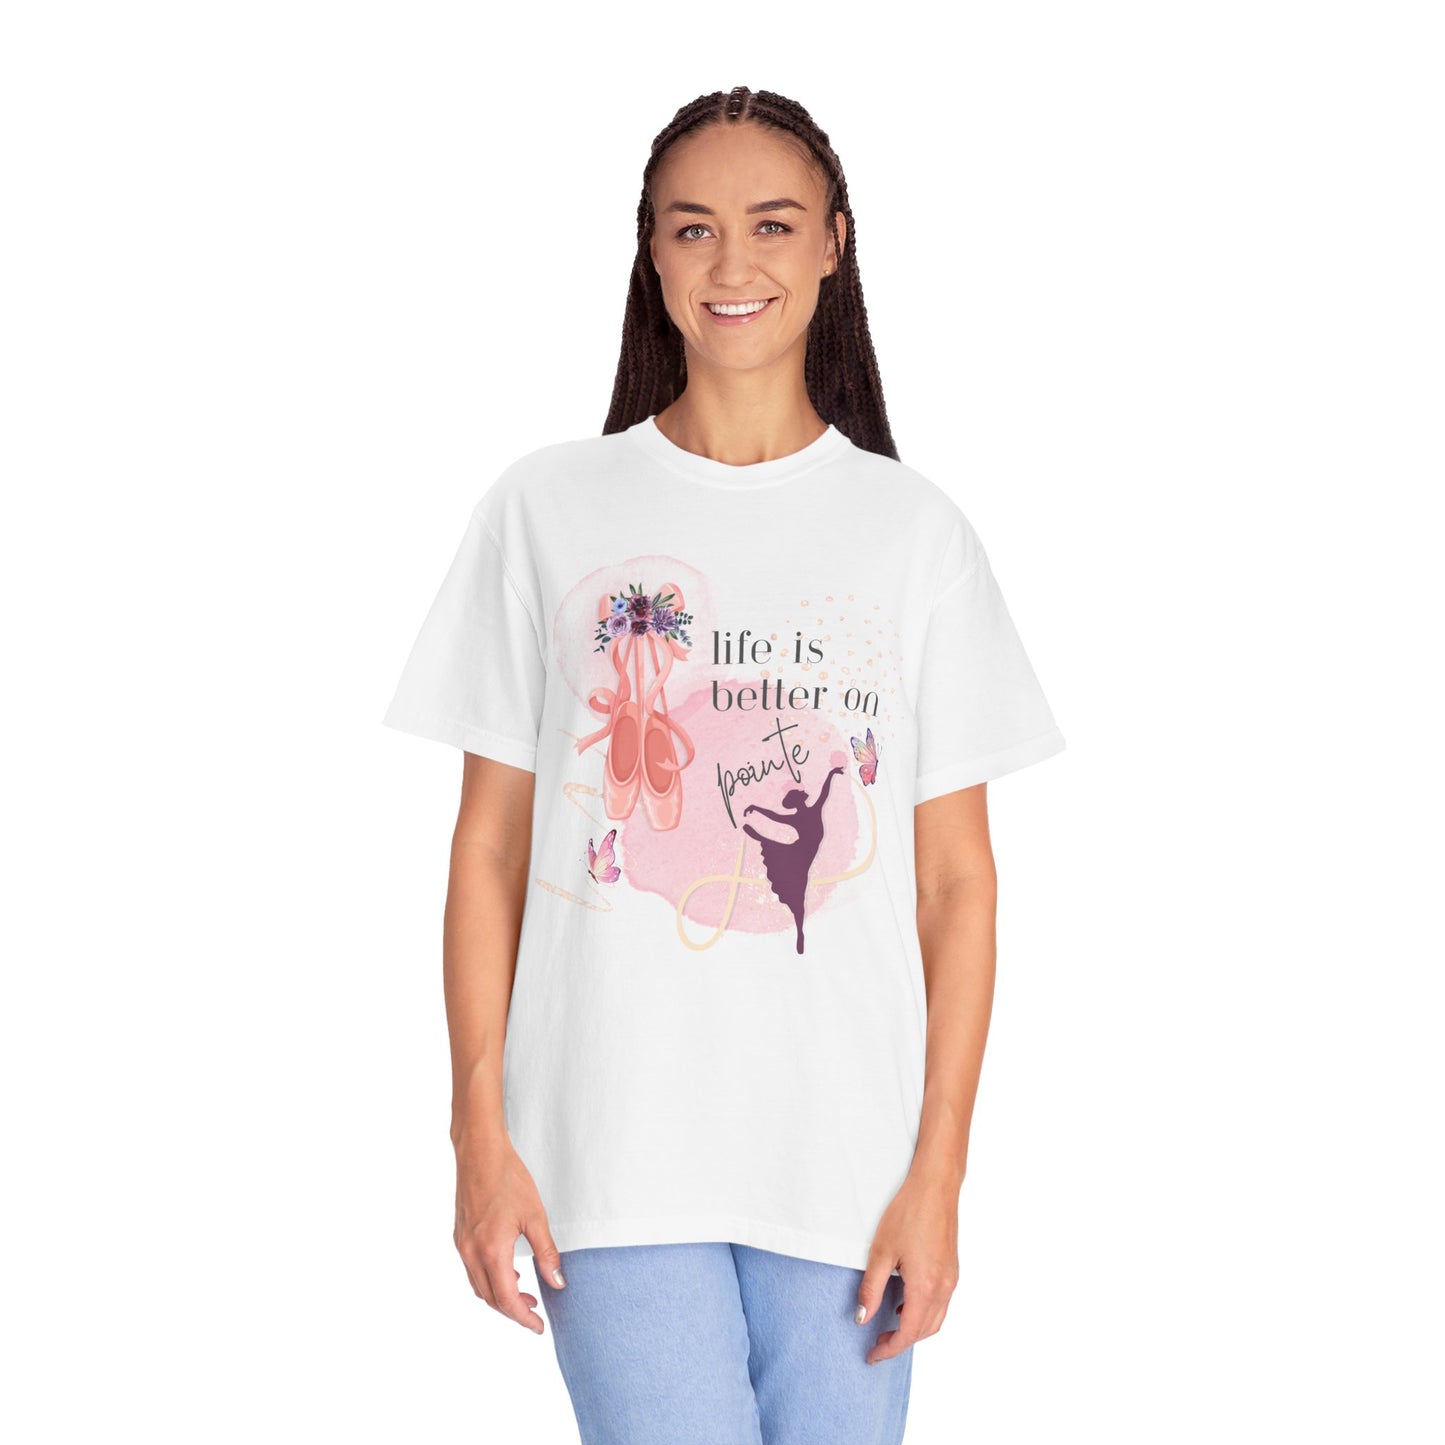 Life is better on Pointe - Unisex Garment-Dyed T-shirt - For the Ballerina in you